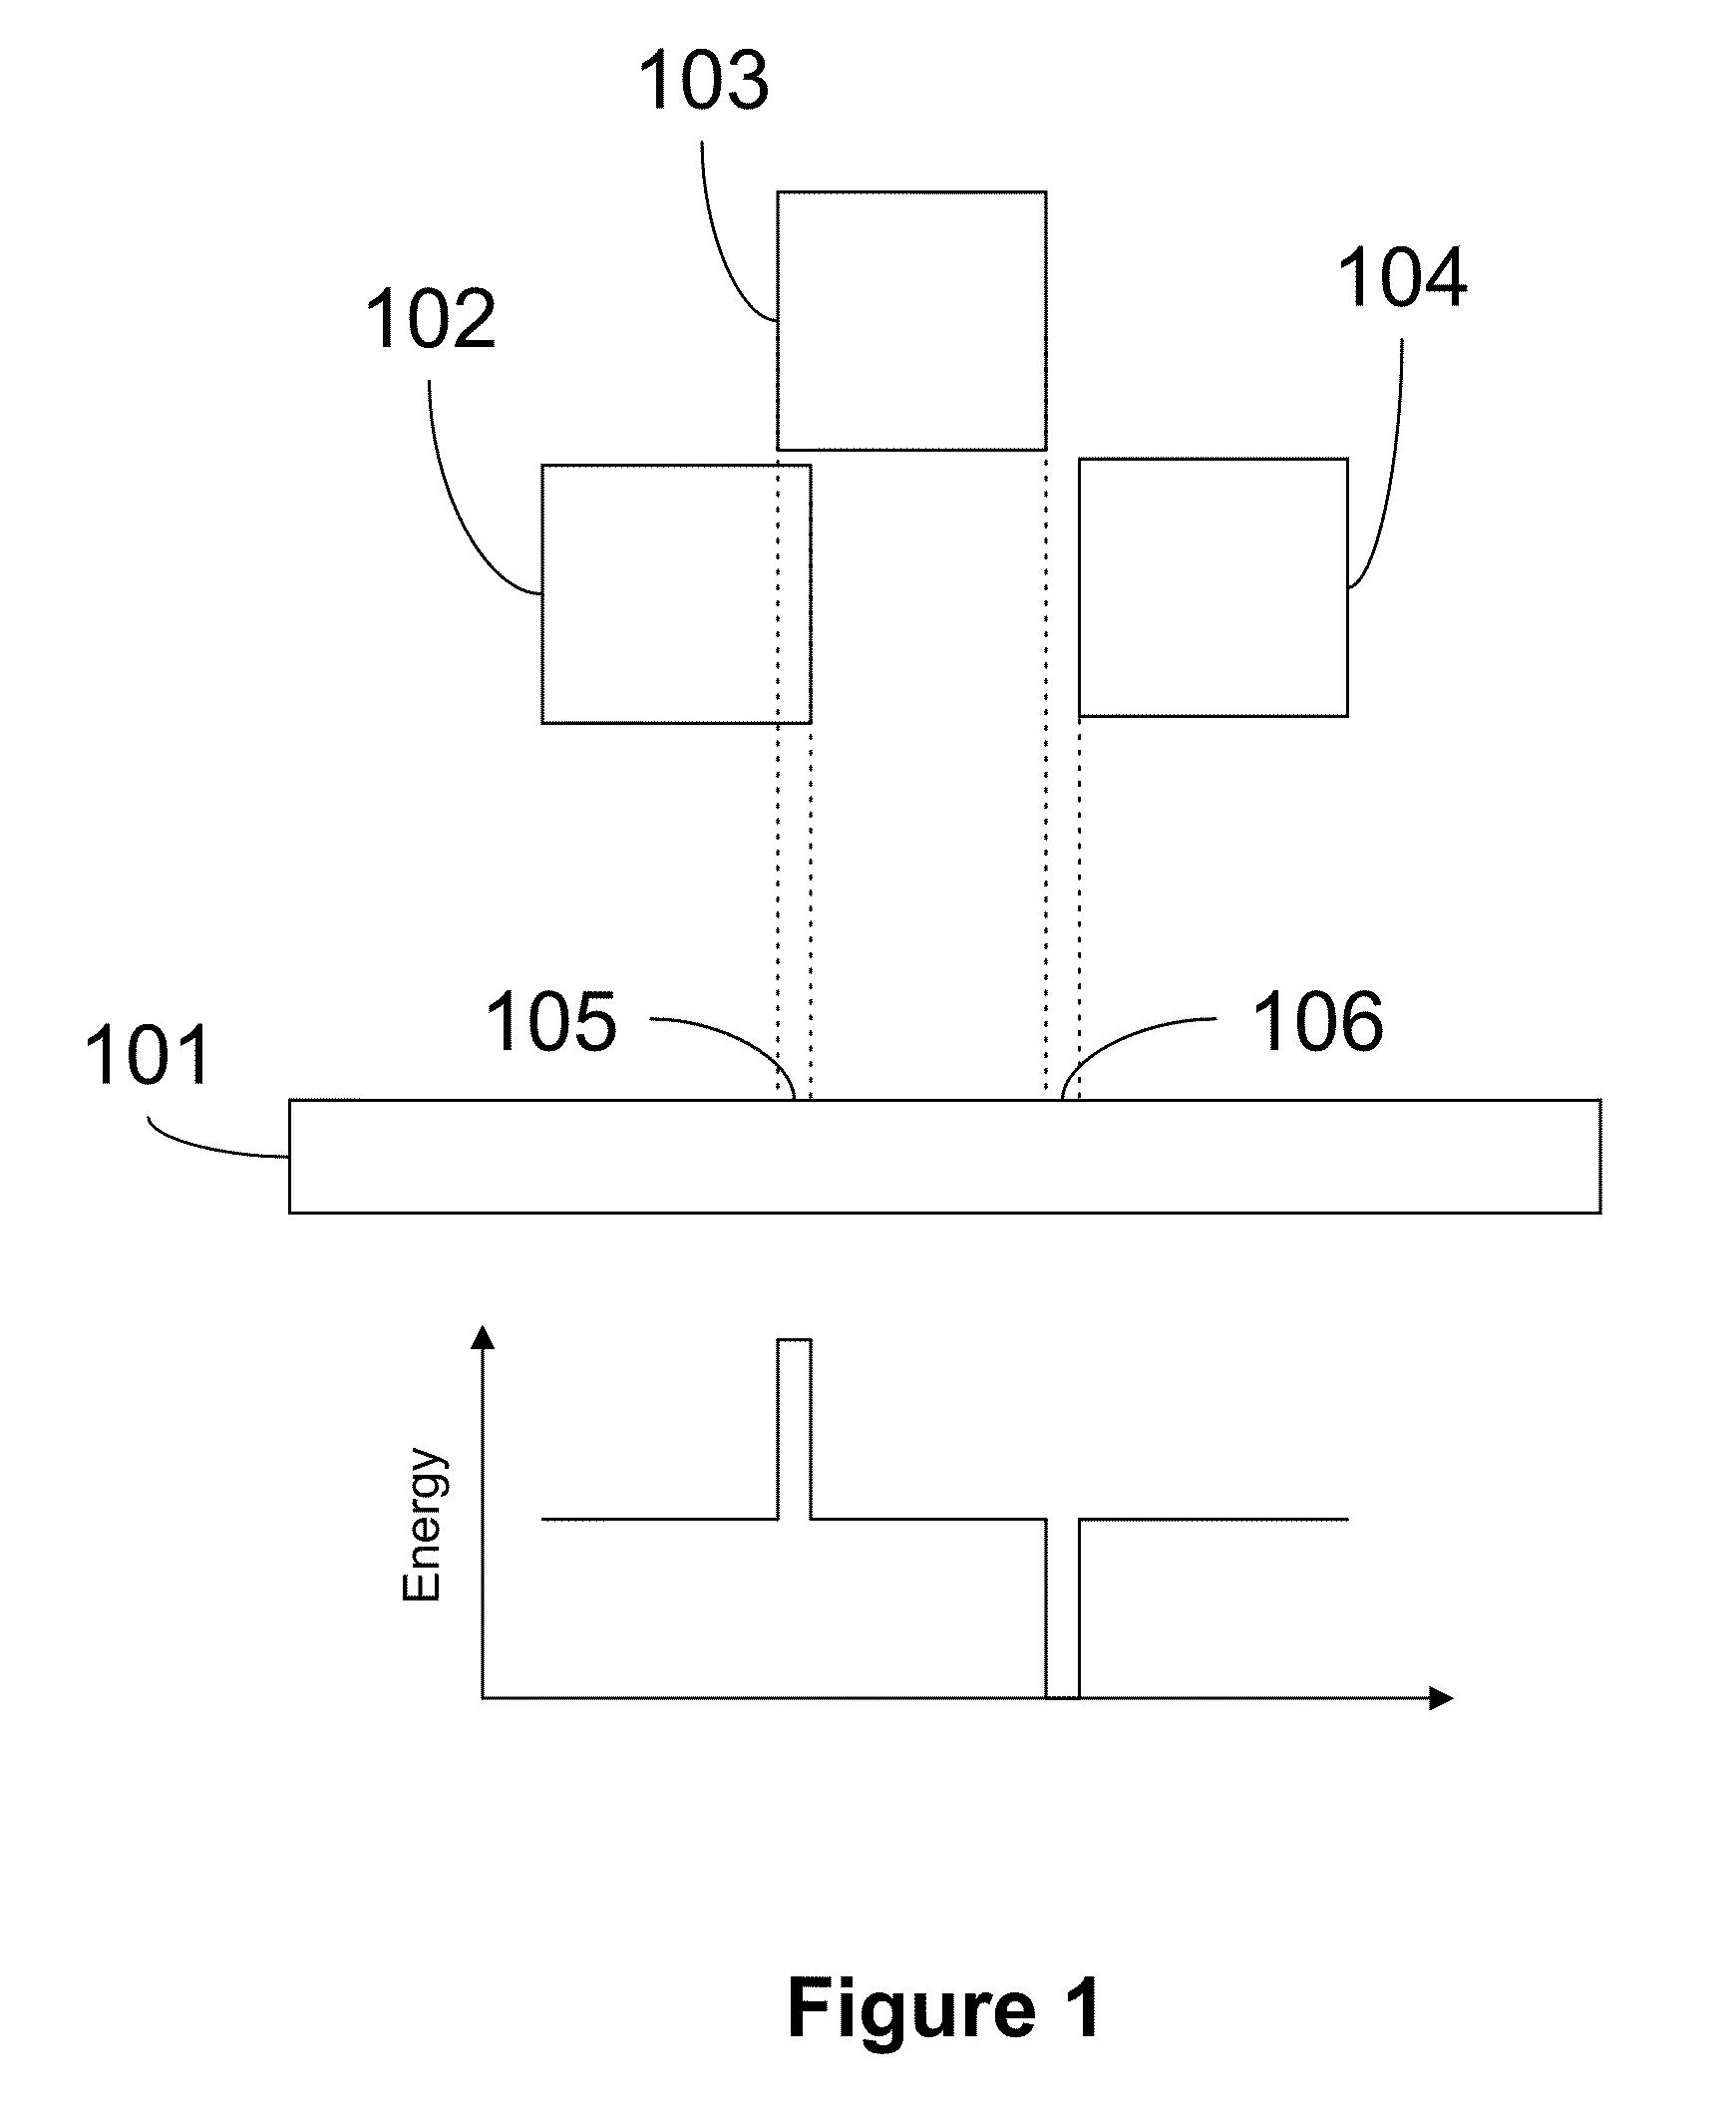 Mirror arrays for maskless photolithography and image display